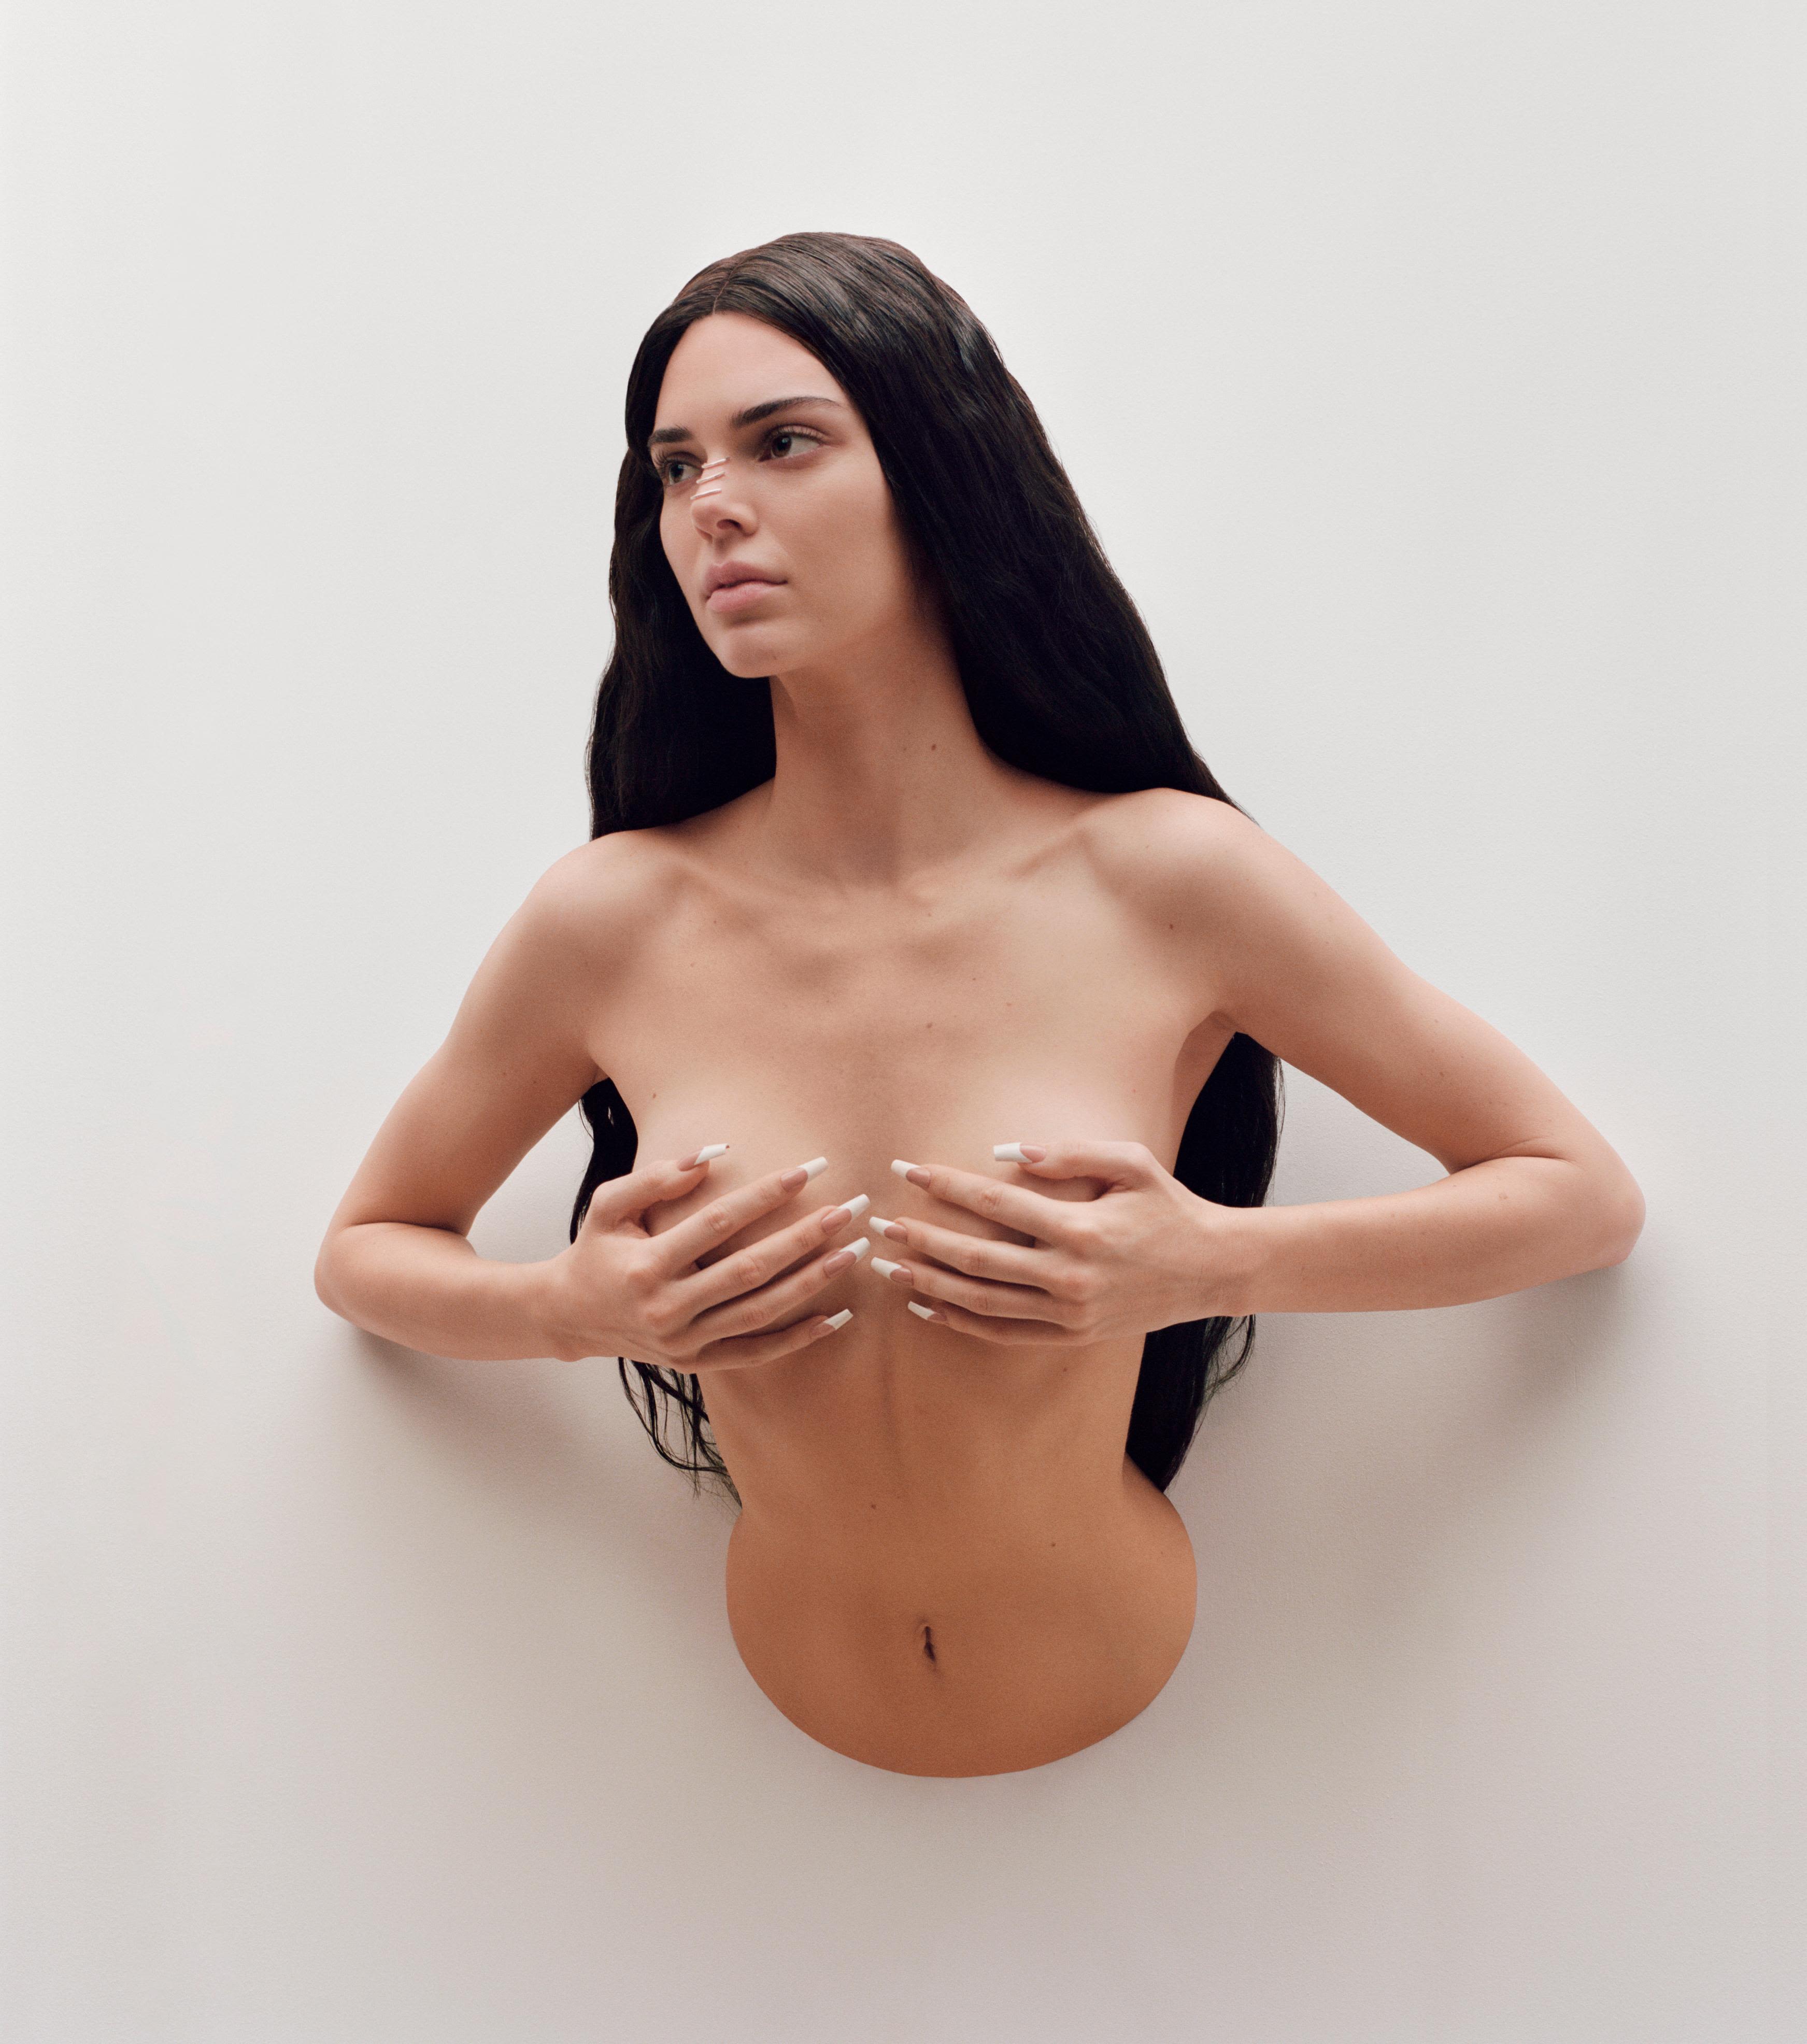 3487px x 3944px - Kendall Jenner photographed as topless wax model by banana art provocateur  | CNN